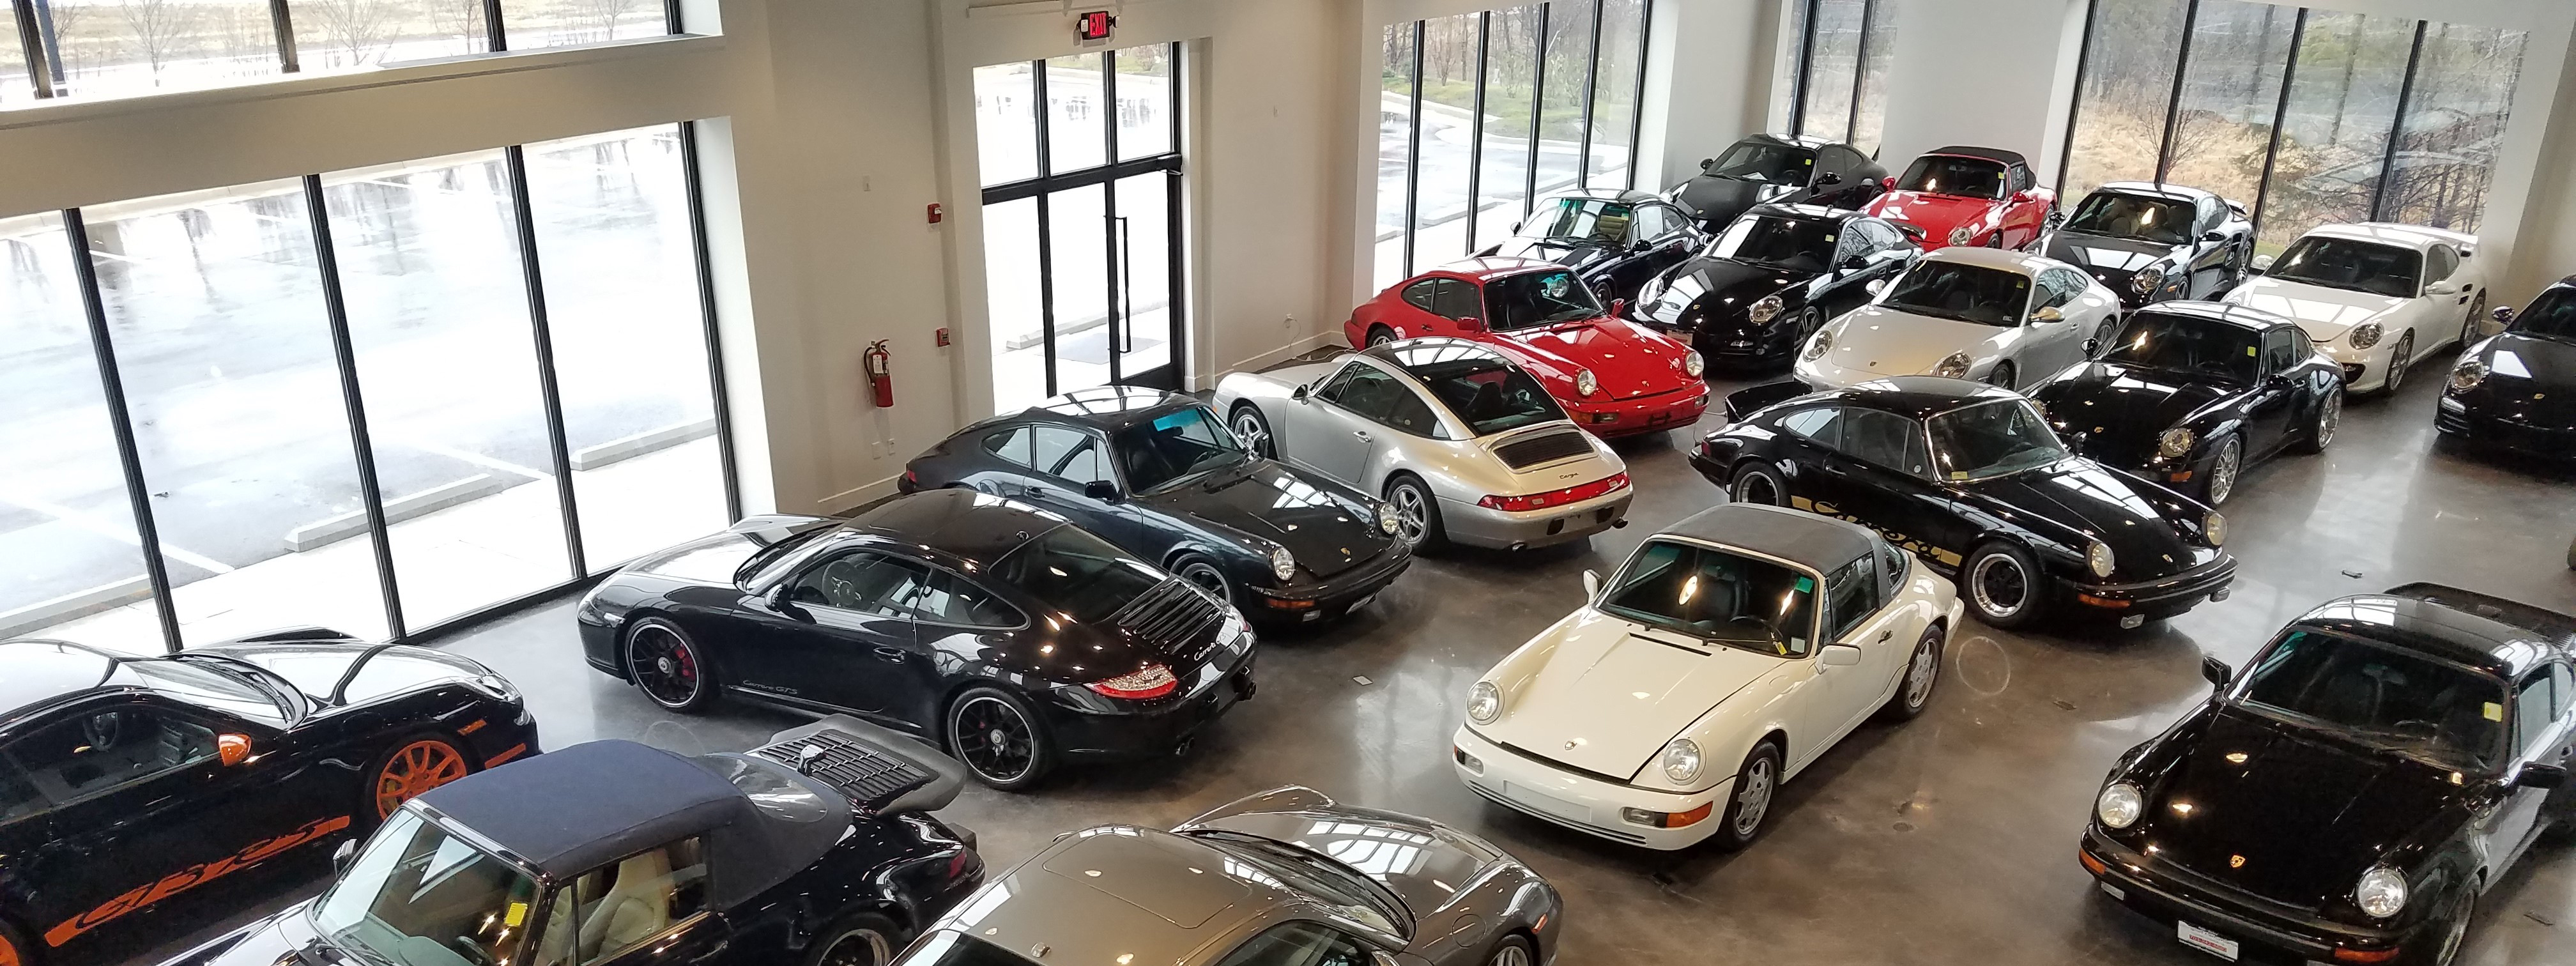 In business for over 30 years, Intersport Performance is the premier independent auto dealer and auto repair specialist for Porsche and most other makes and models of European cars in Northern Virginia.